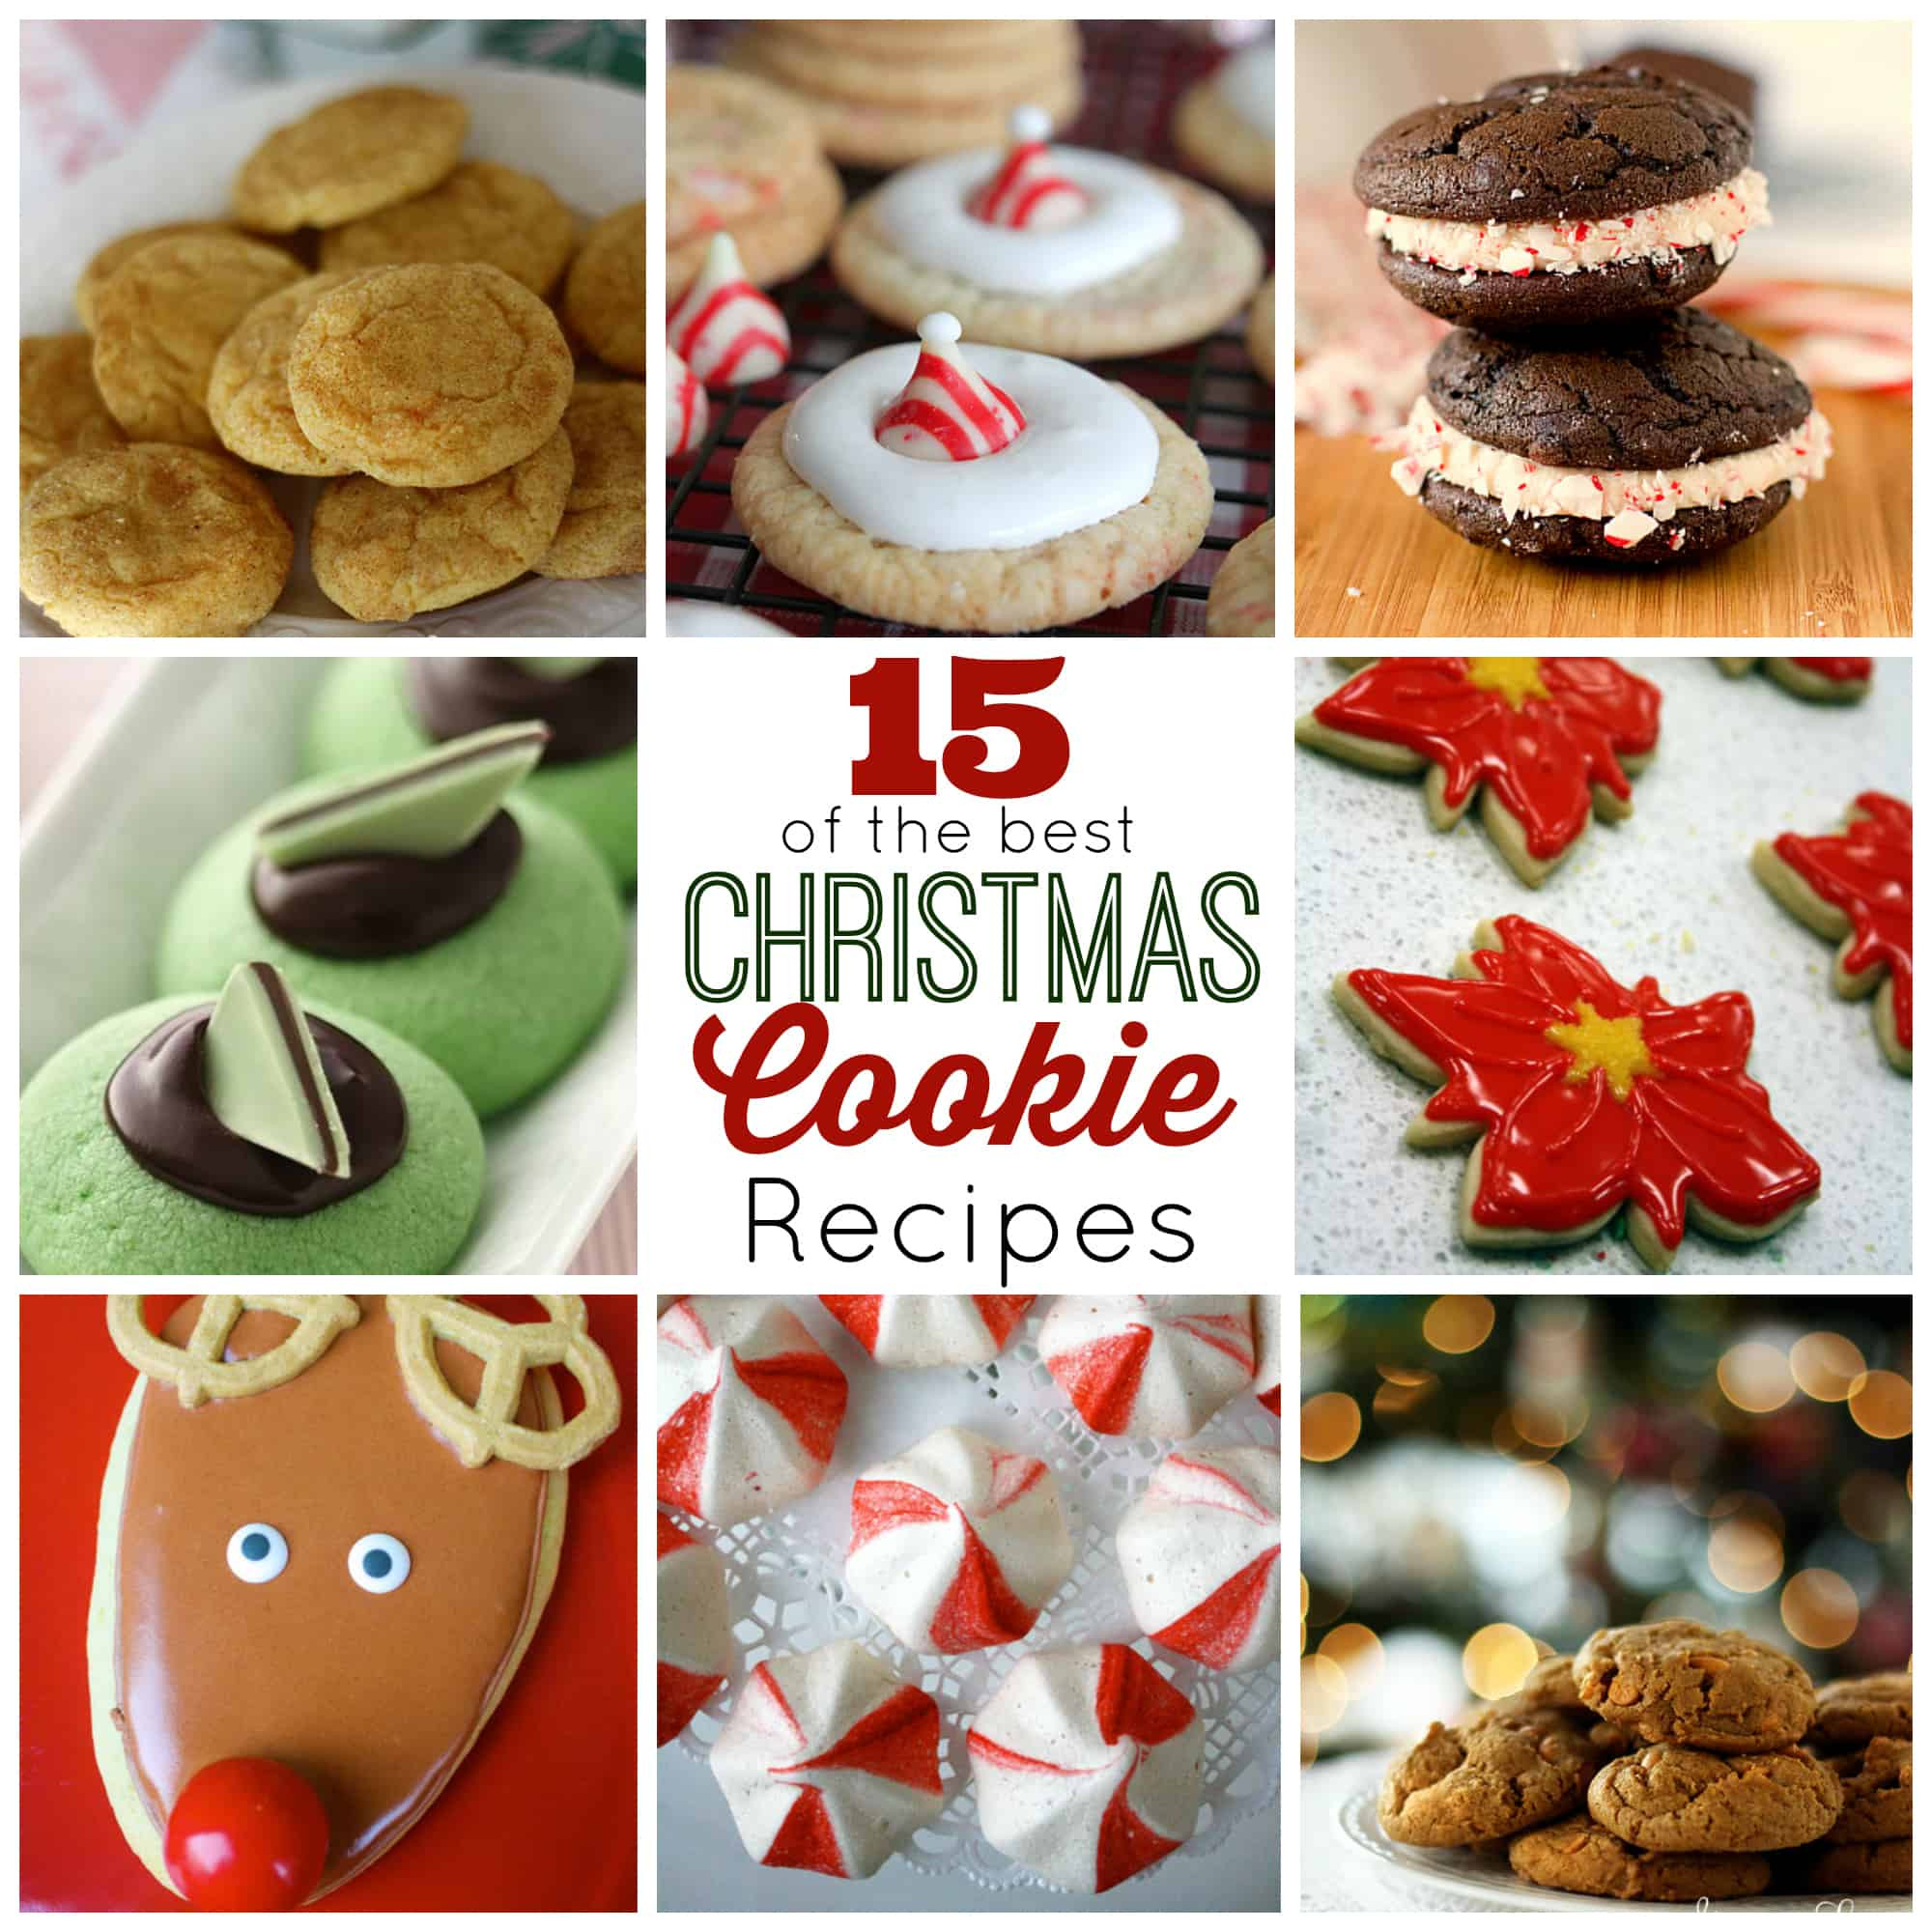 Holiday Baking Gift Ideas
 15 of the Best Christmas Cookies